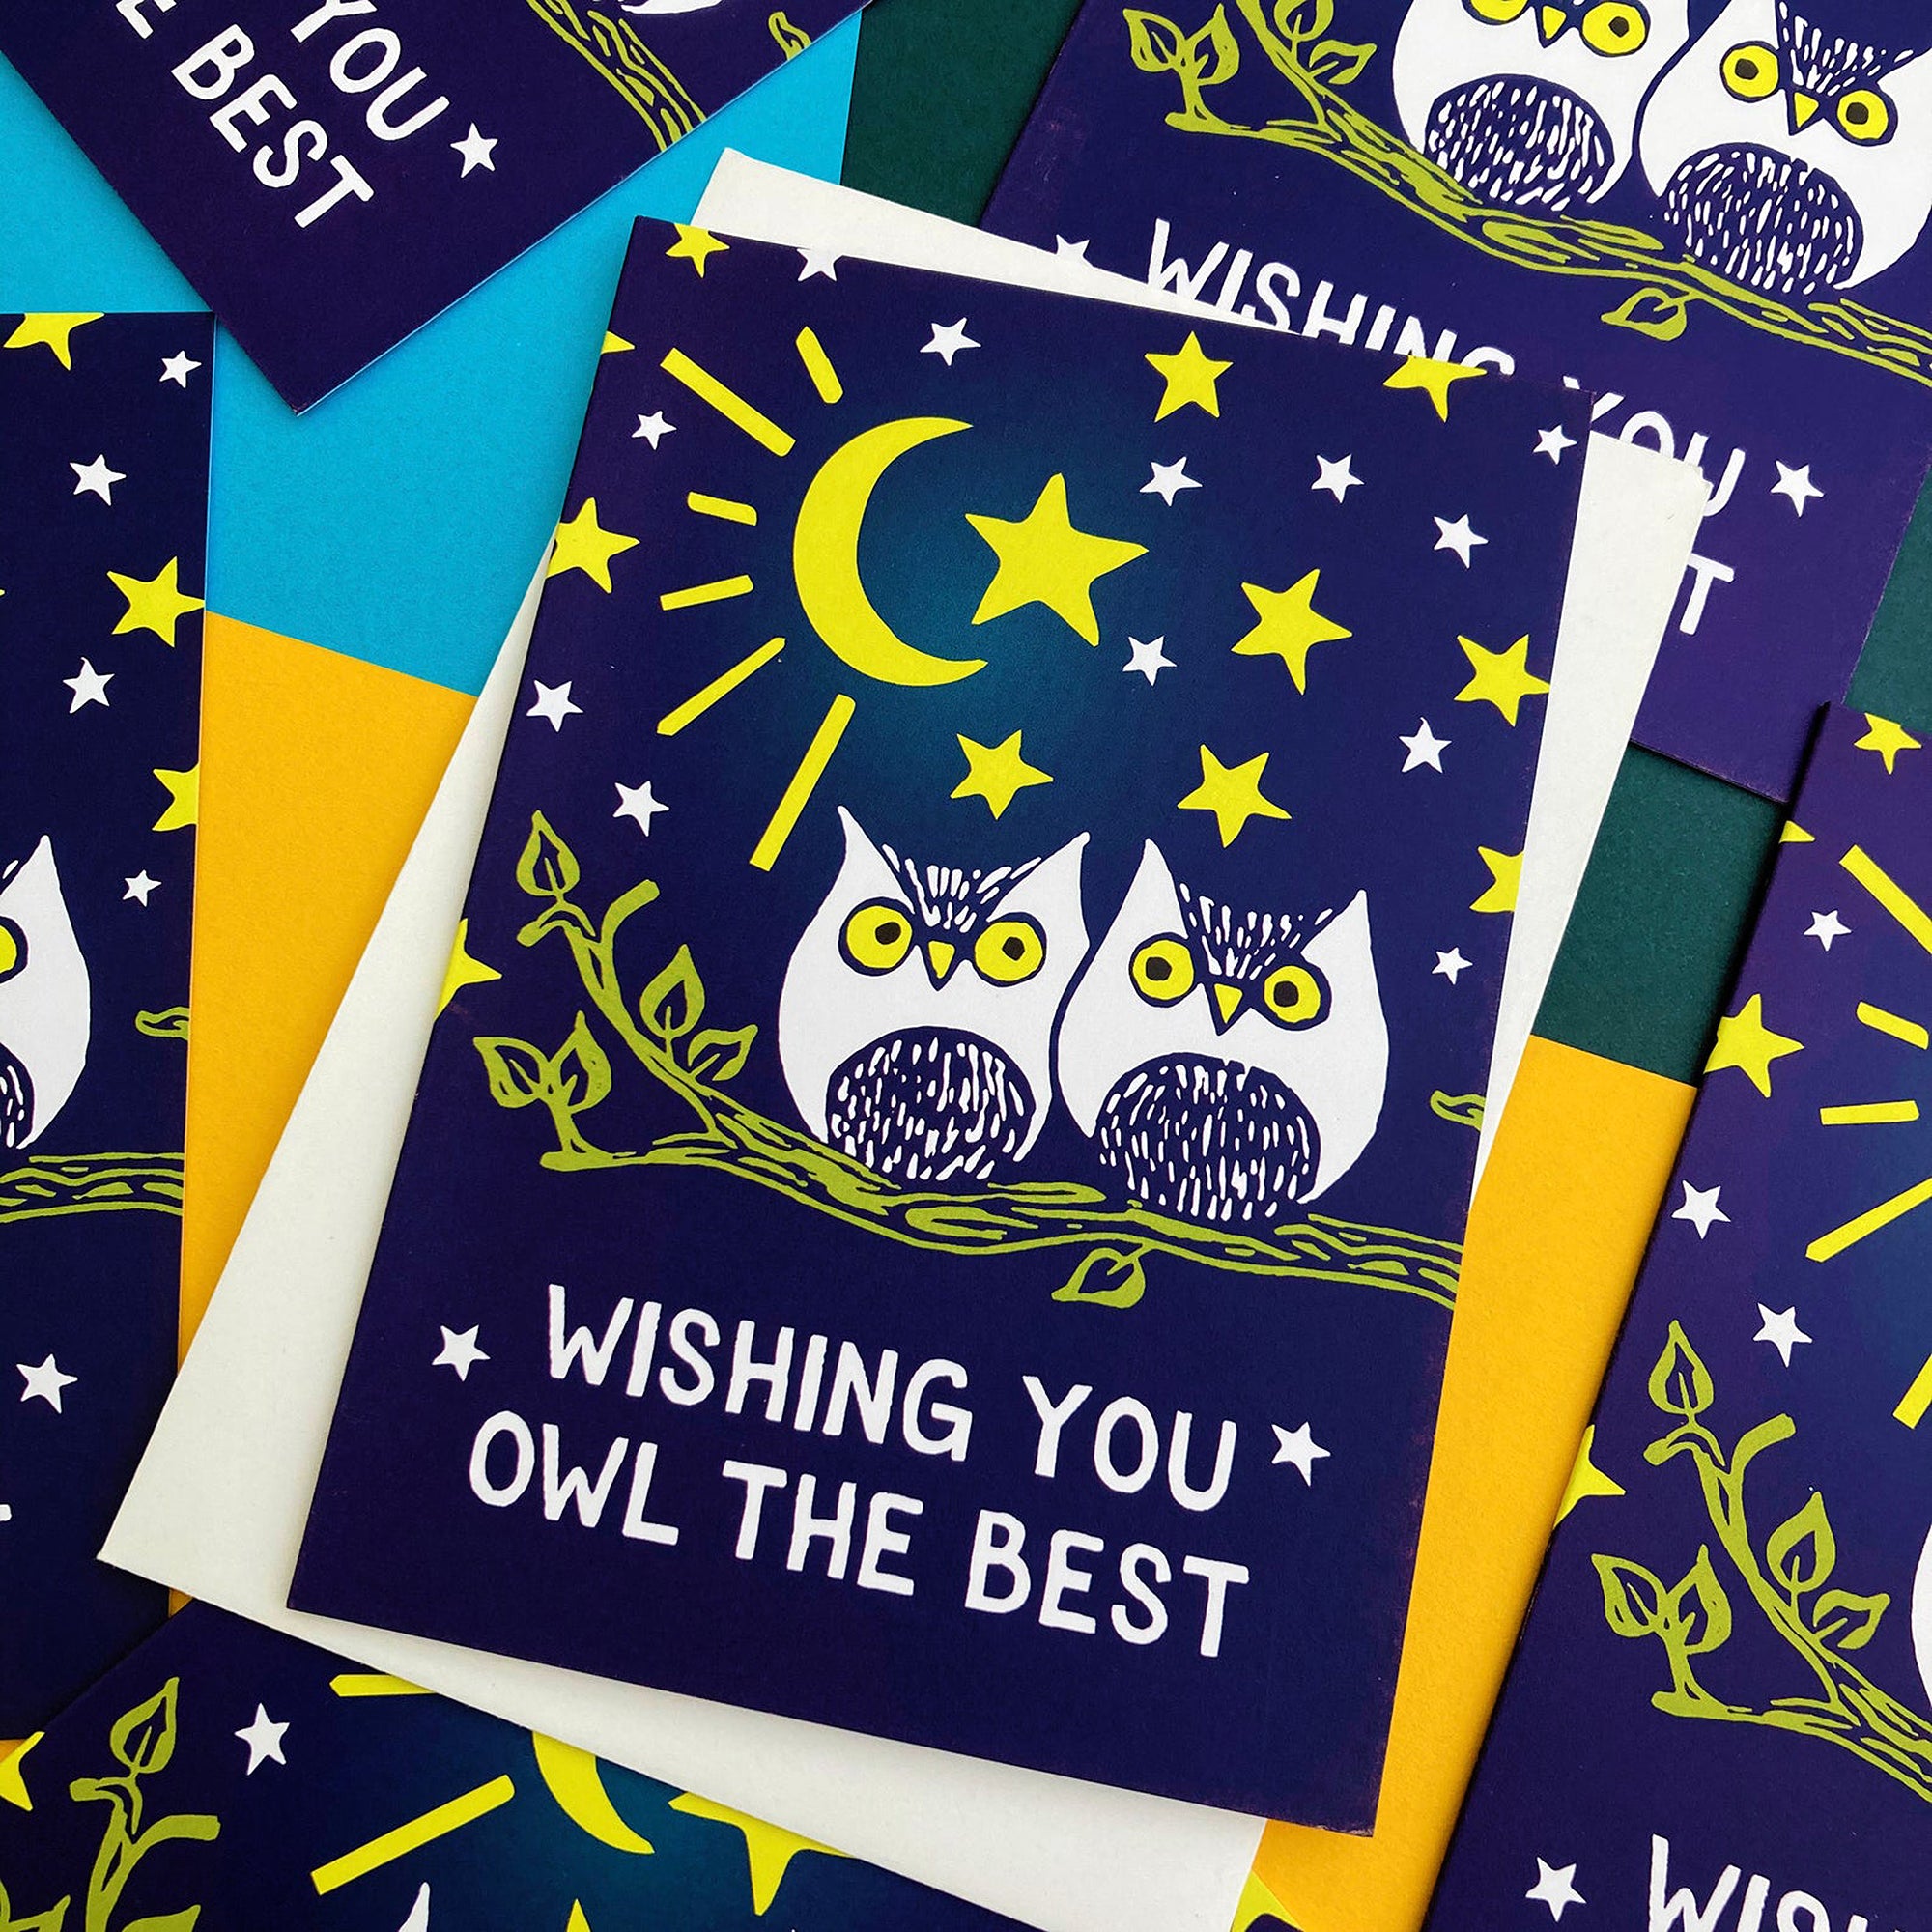 Wishing you owl the best card